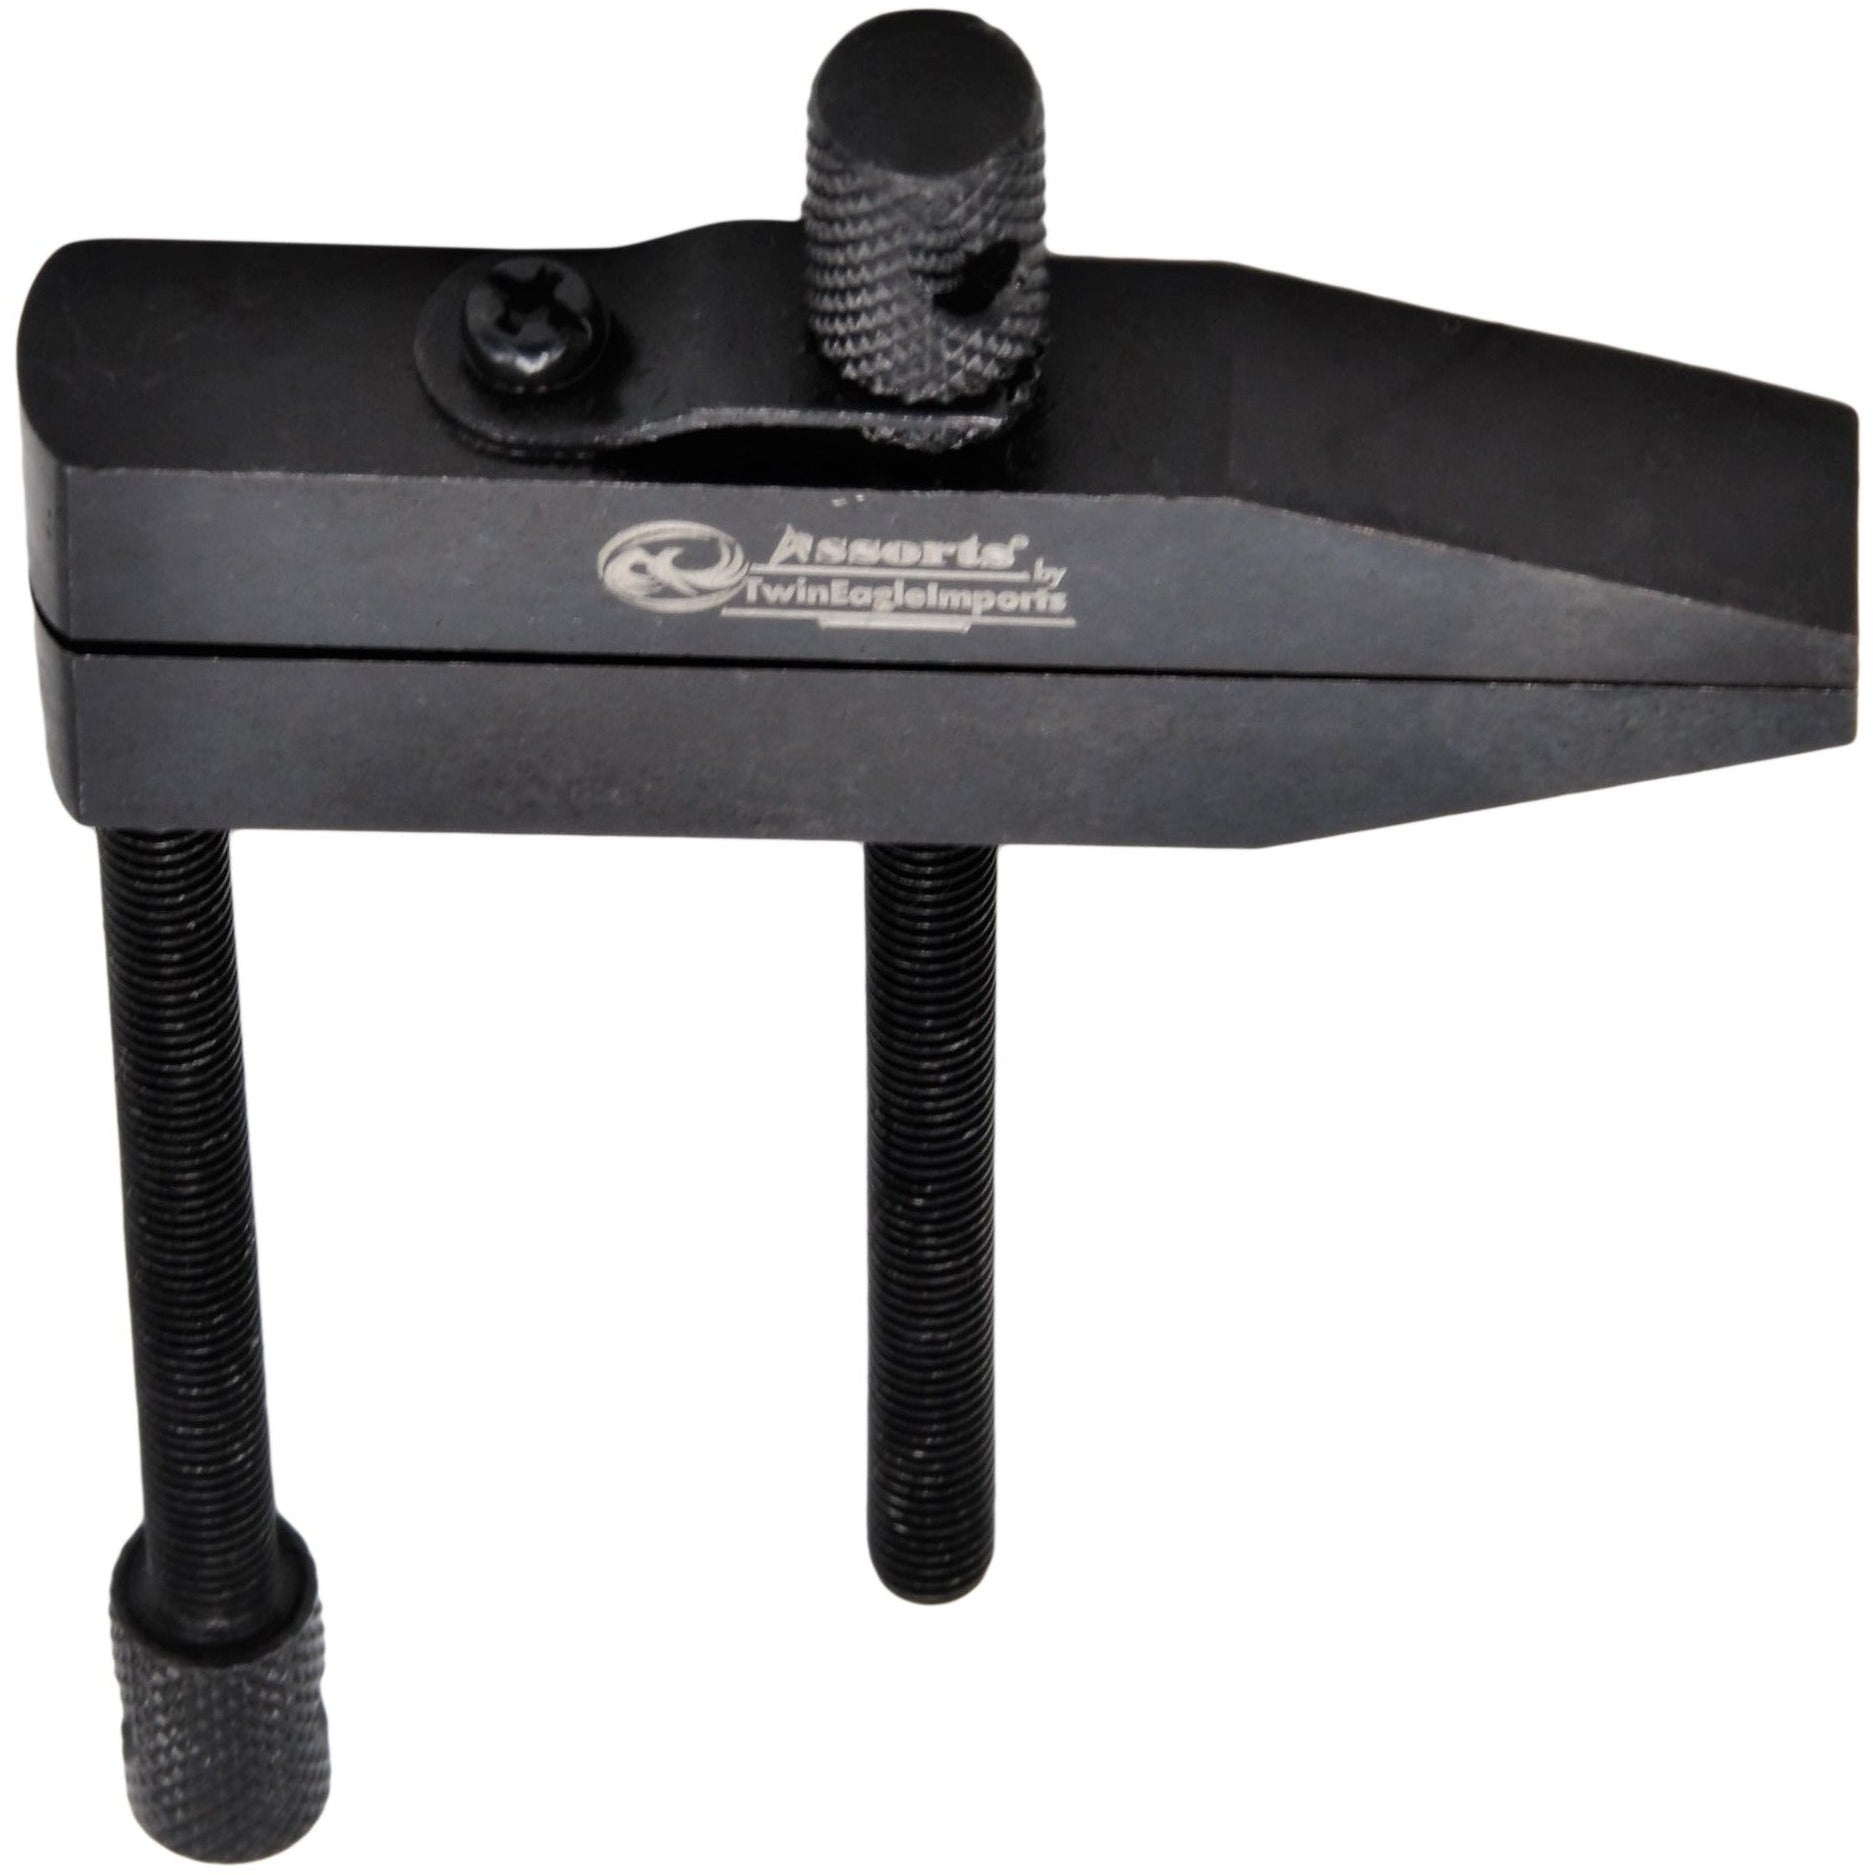 Assorts Toolmakers 3" Parallel Clamp Vise